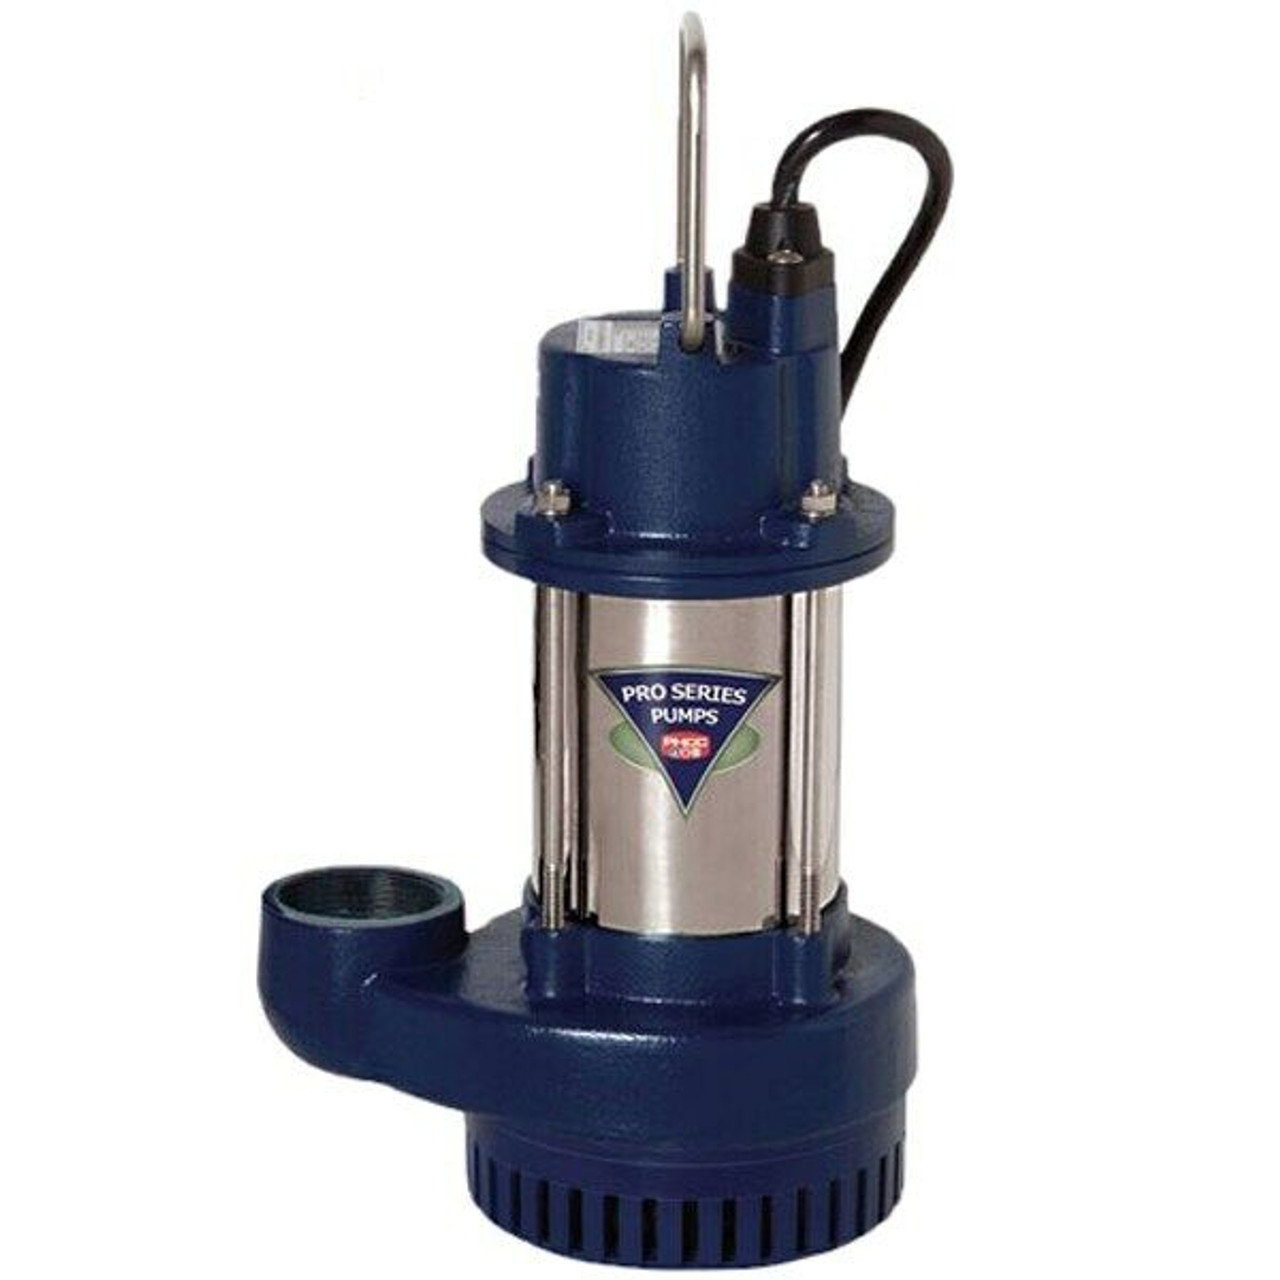 Pro Series S3033-NS Steel Submersible Sump Pump